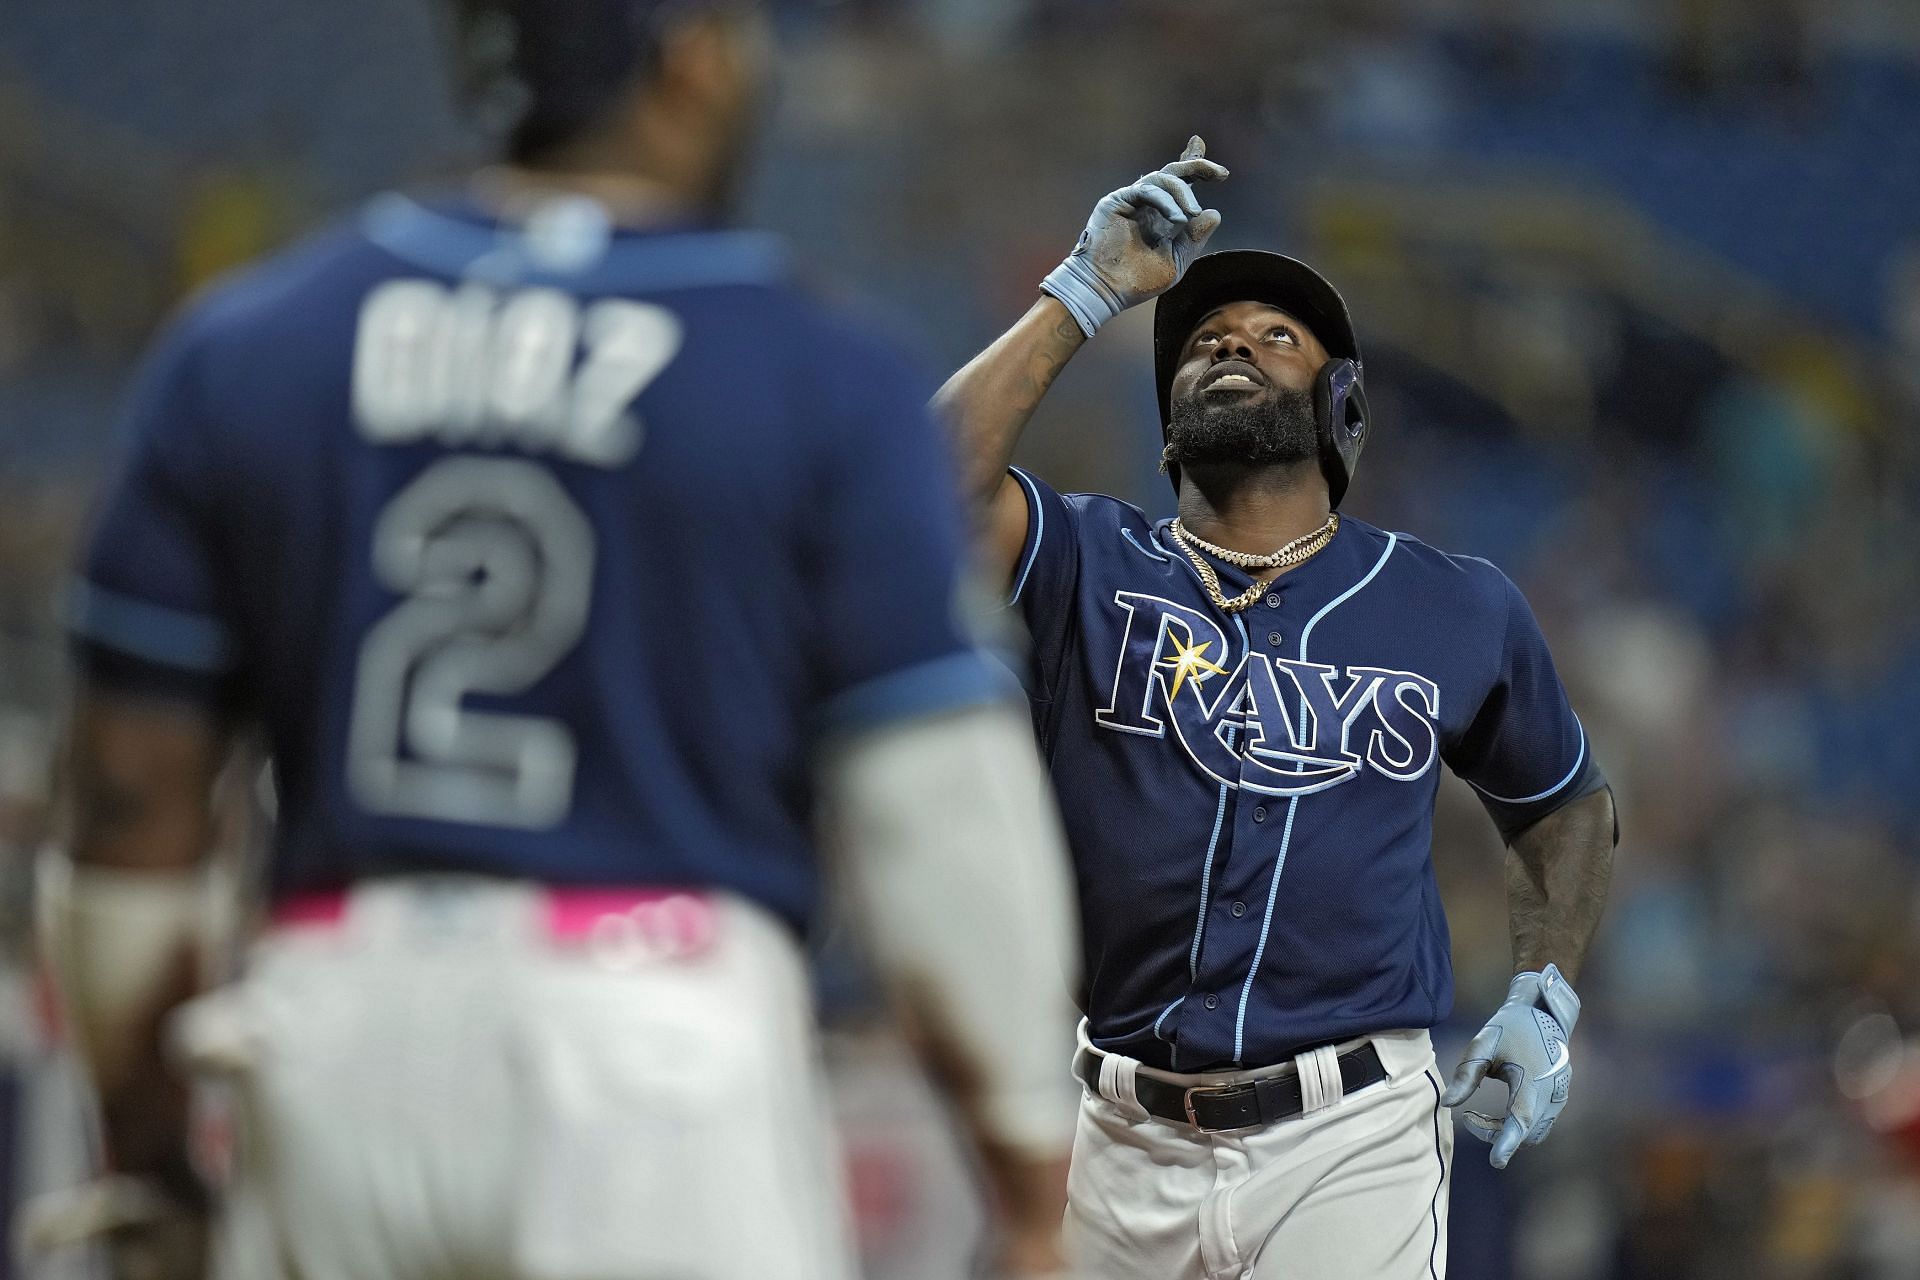 Randy Arozarena, right, celebrates his two-run home run against the Los Angeles Angels in St. Petersburg, Florida